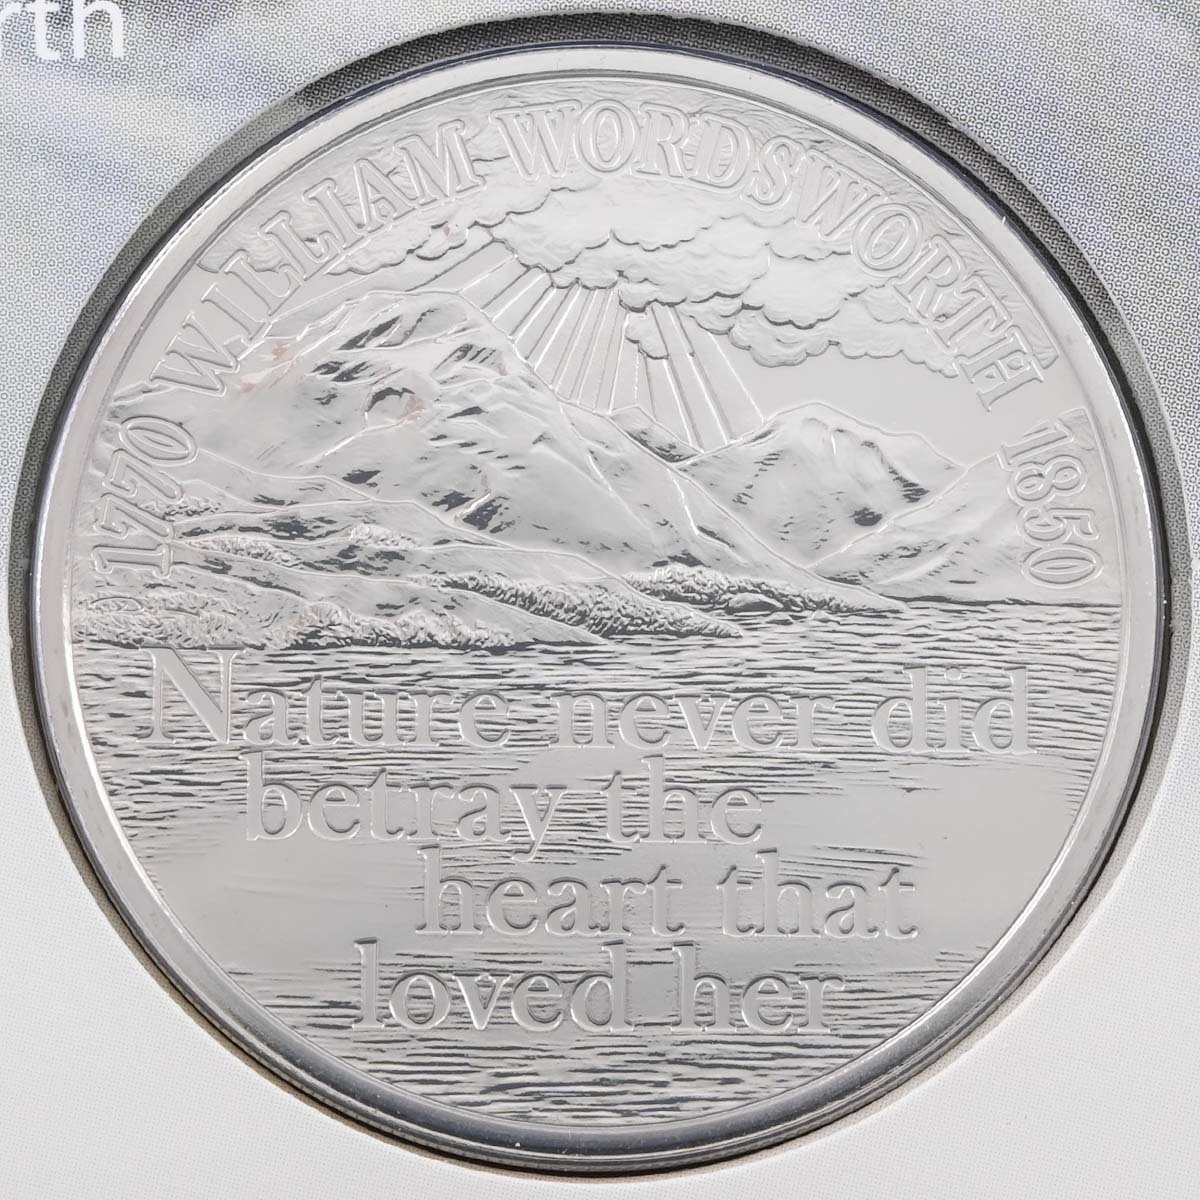 UK20WWBU 2020 William Wordsworth 250th Anniversary Five Pound Crown Brilliant Uncirculated Coin In Folder Reverse